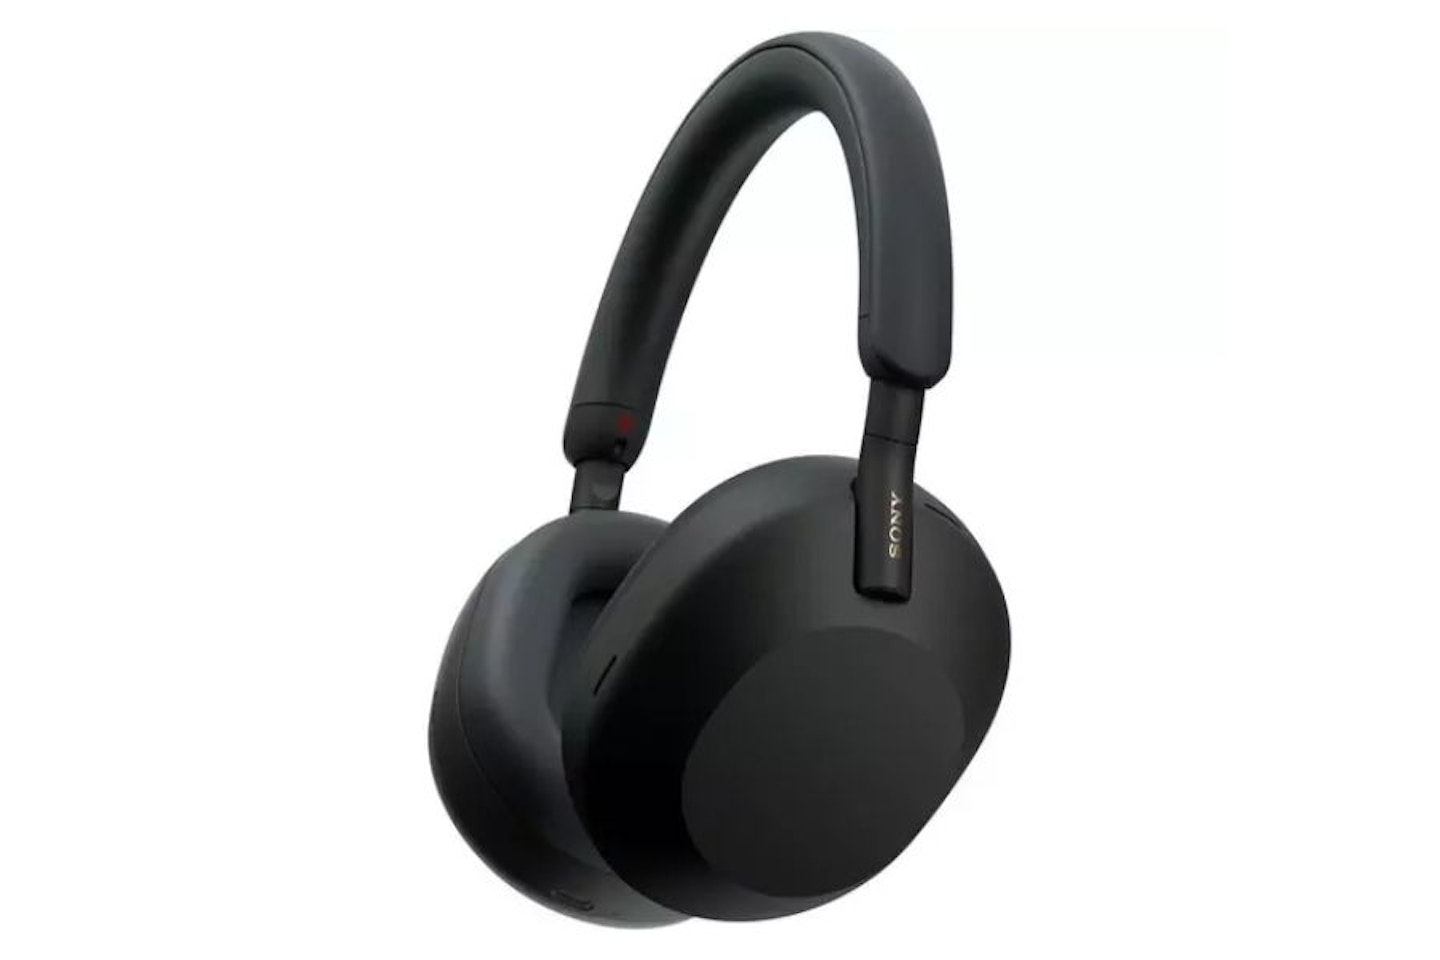 SONY WH-1000XM5 Wireless Bluetooth Noise-Cancelling Headphones